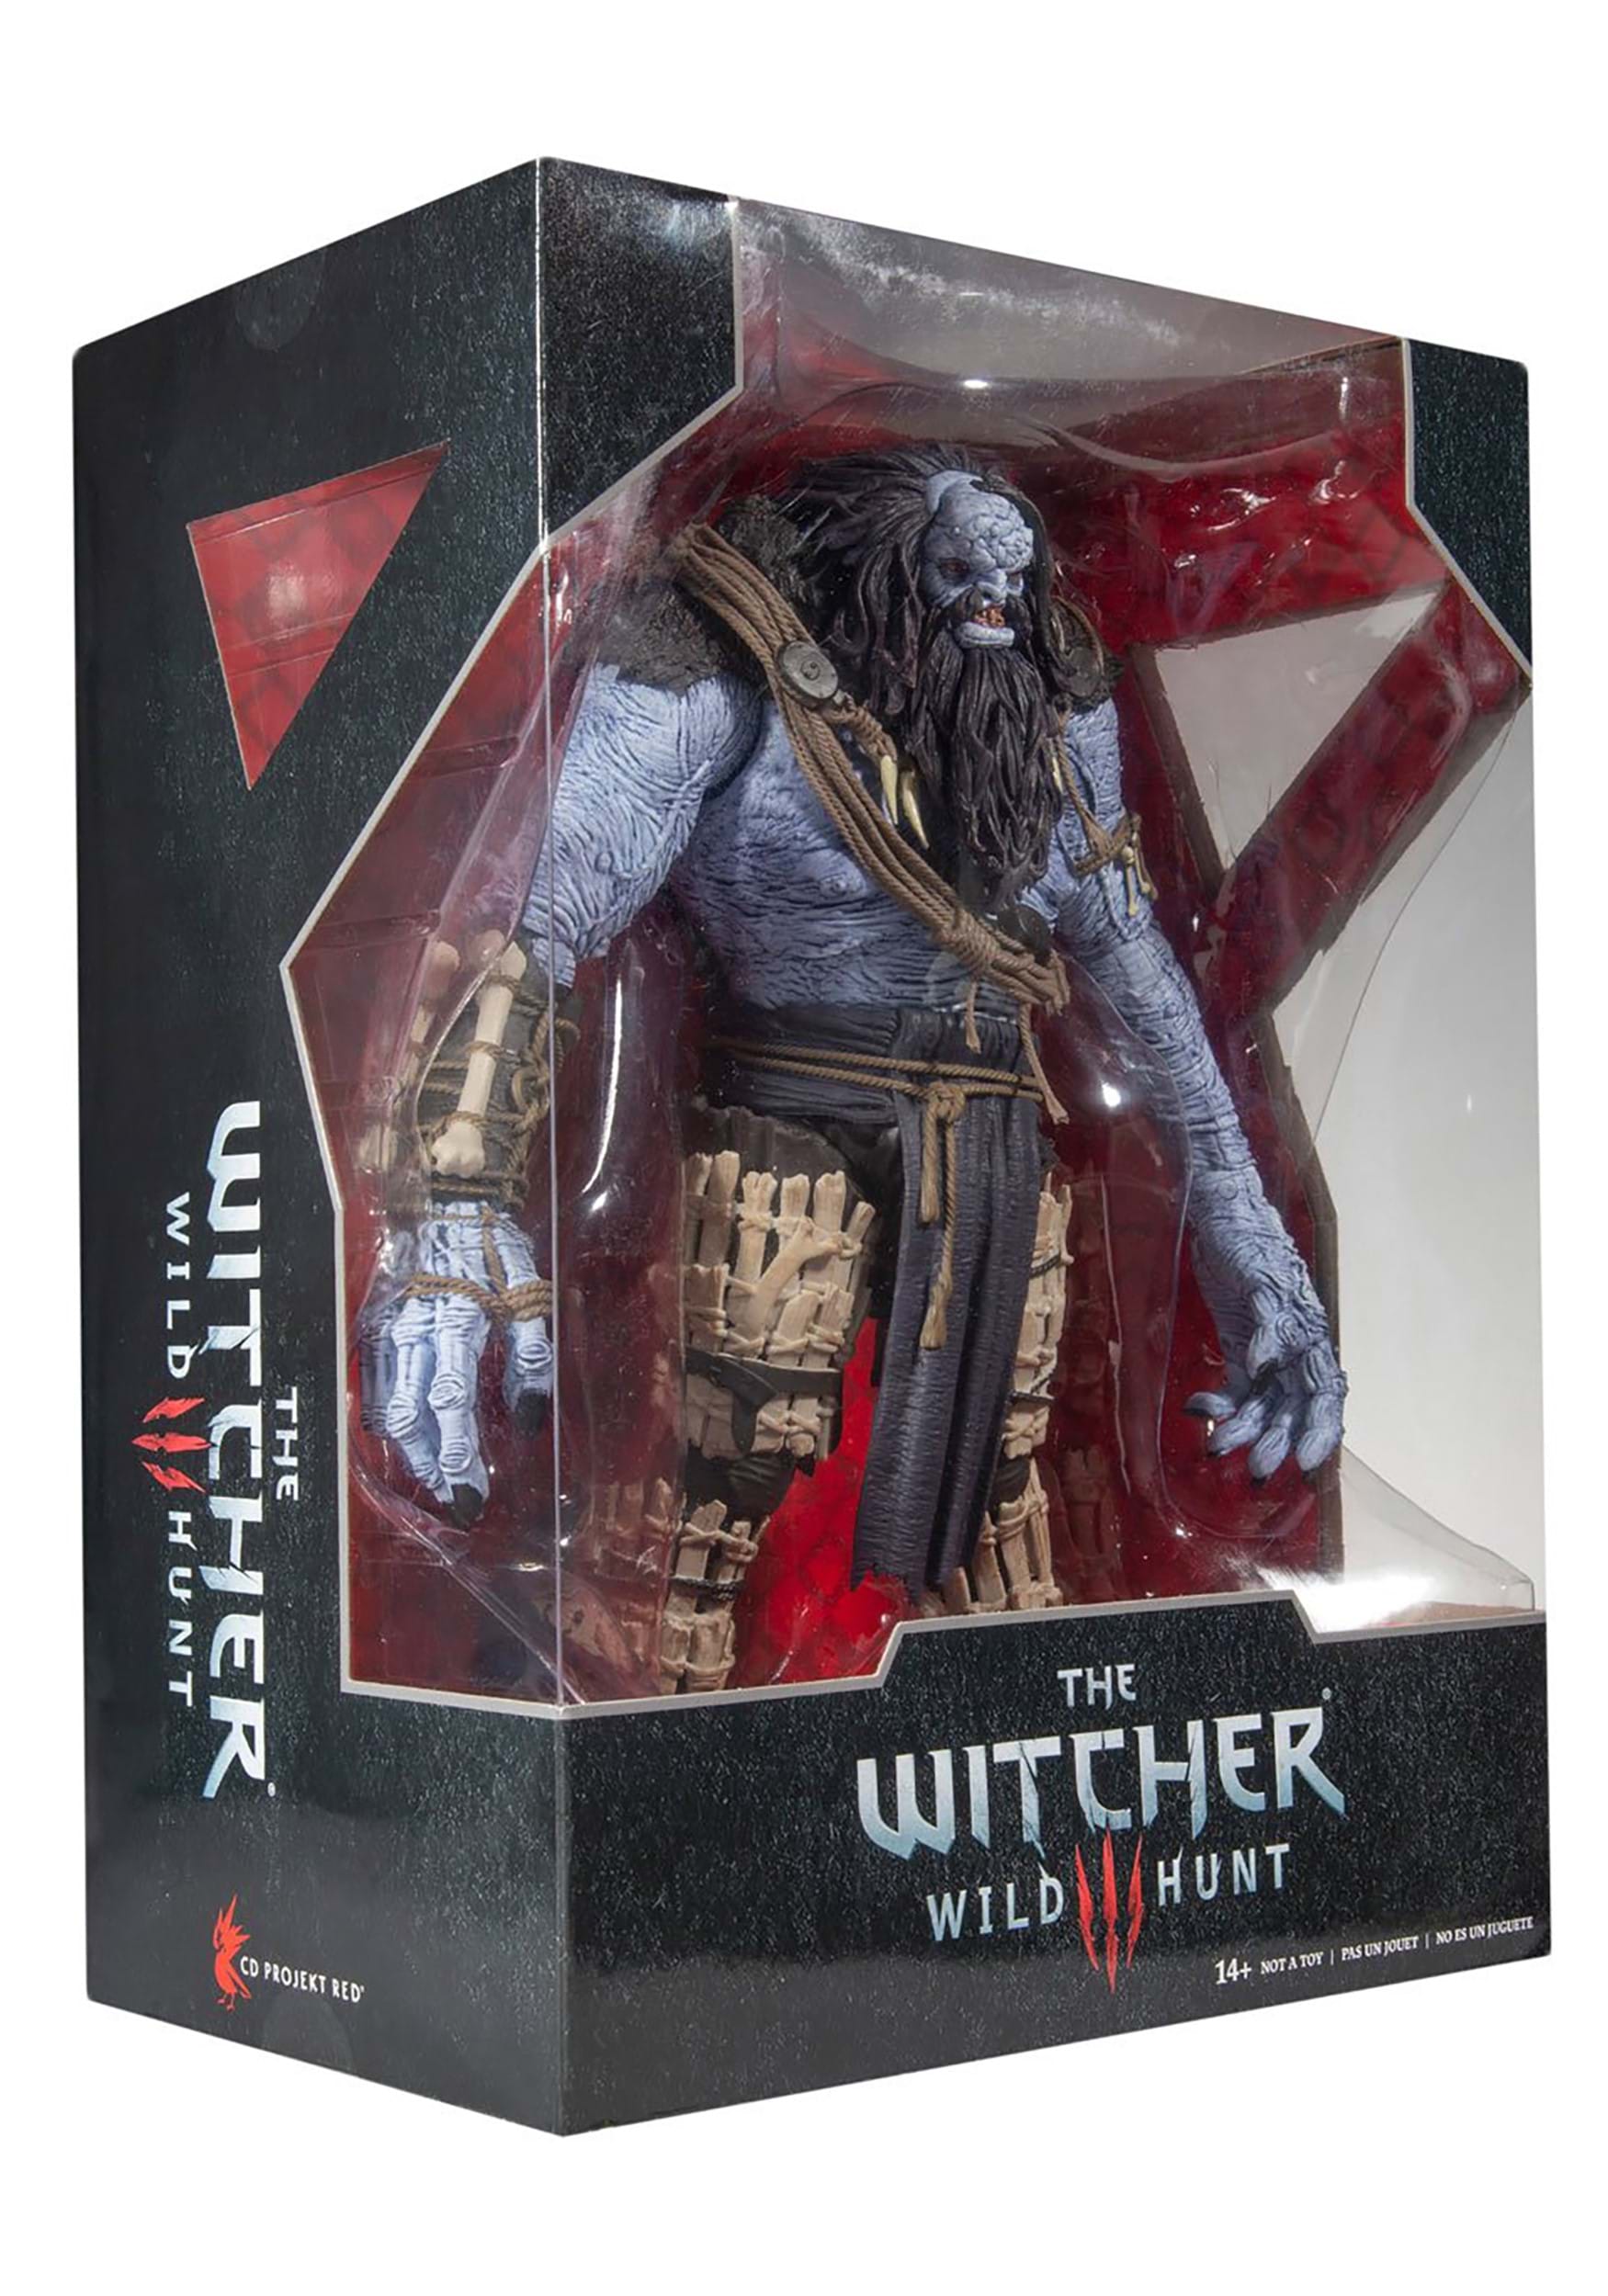 The Witcher Gaming Ice Giant 12 Inch Mega Figure